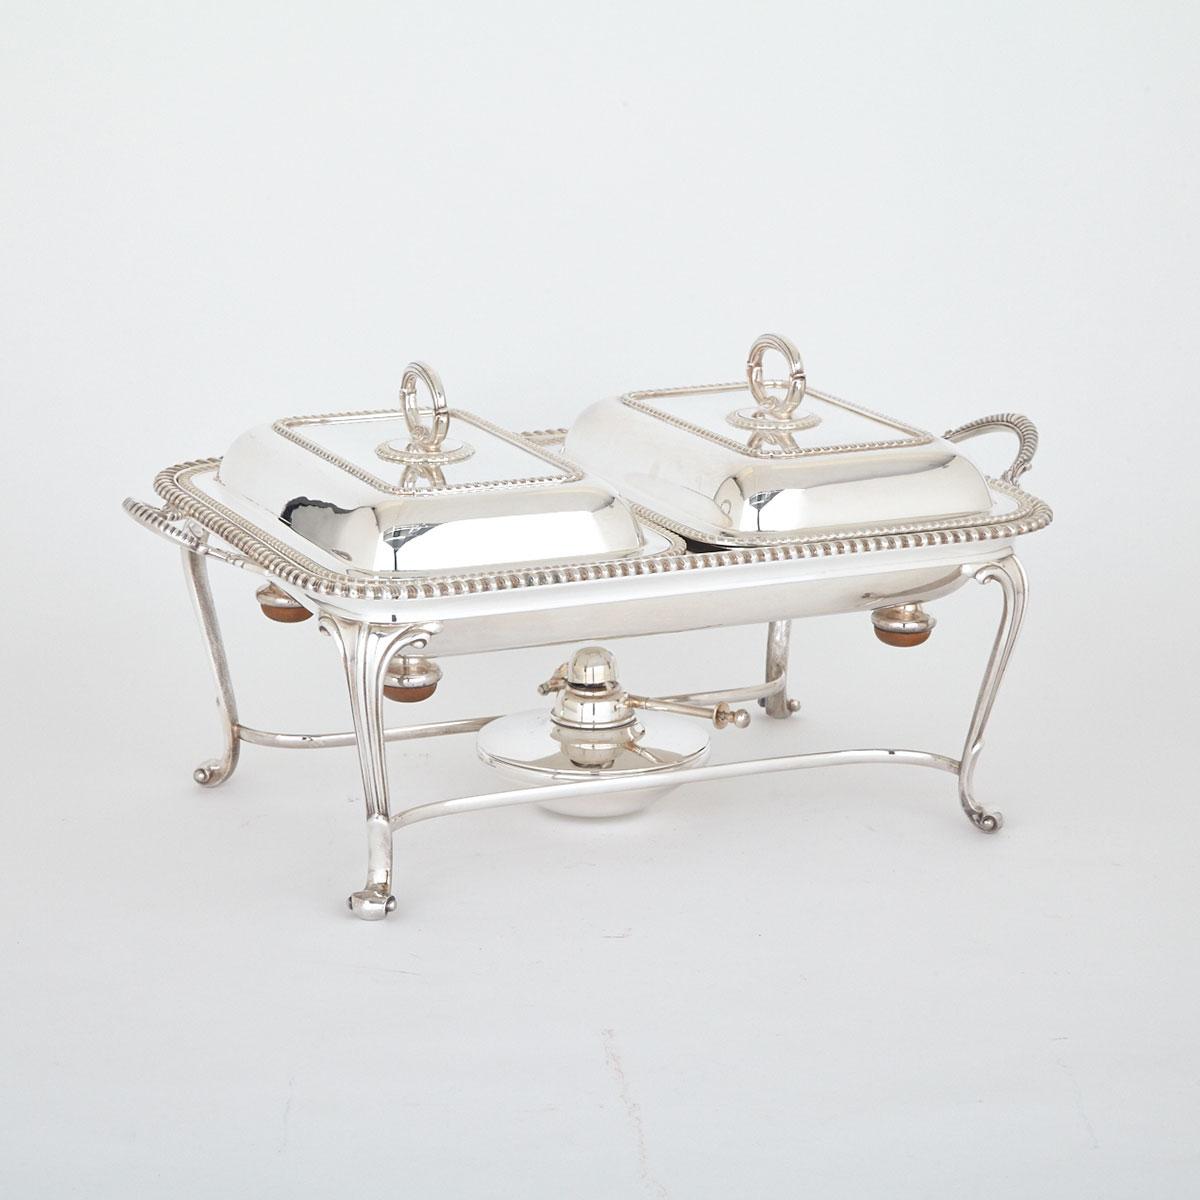 English Silver Plated Double Entrée Dish With Warming Stand, 20th century